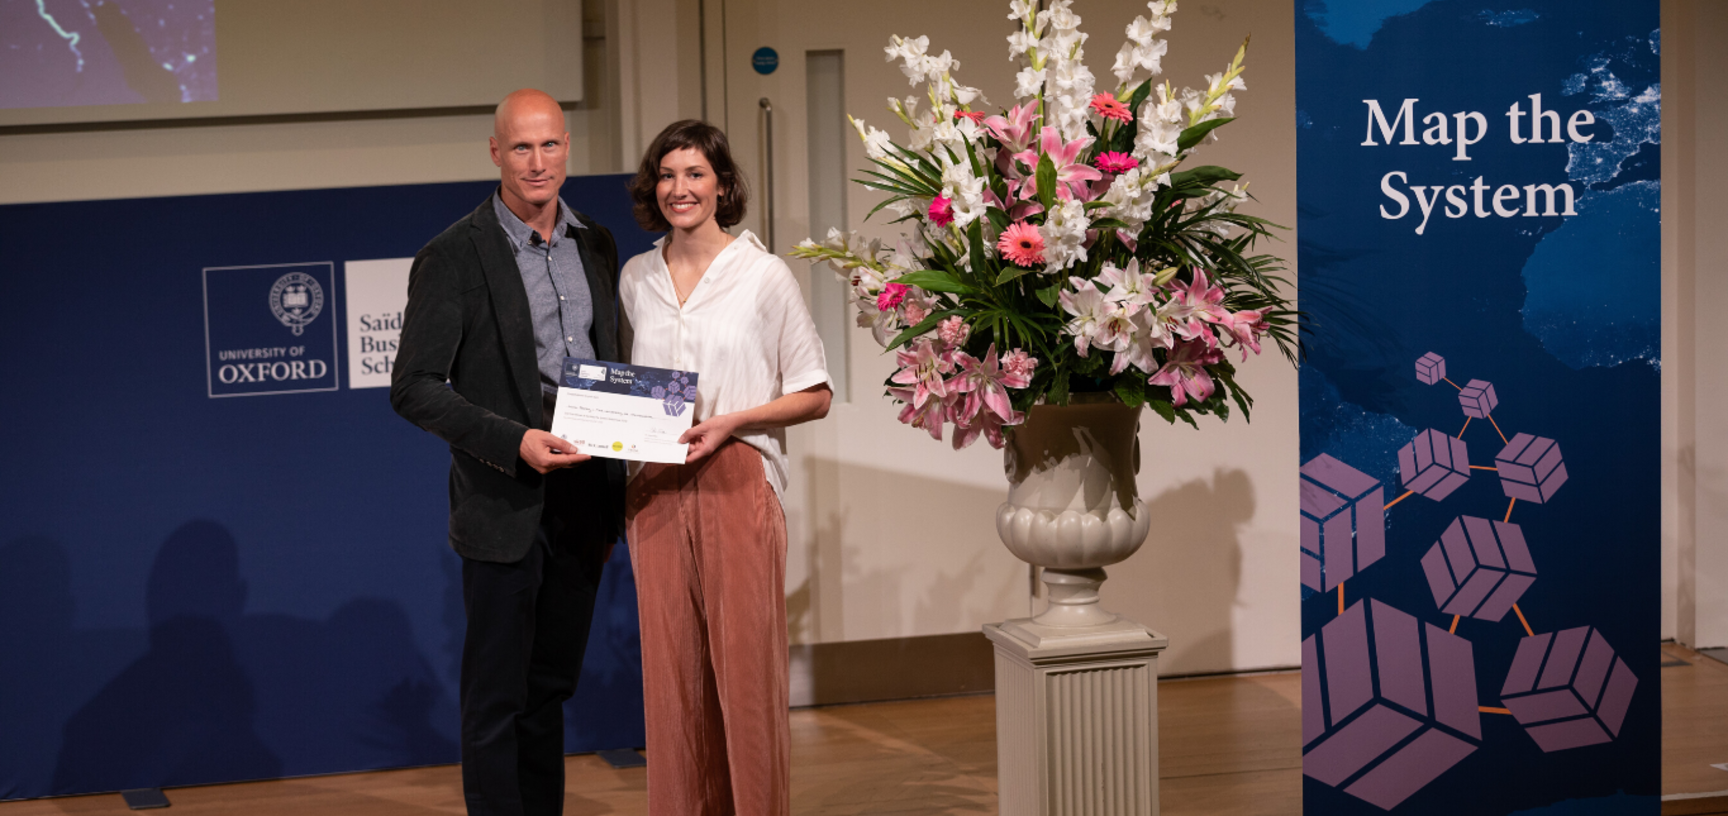 Dr. Abbey Eeles, University of Melbourne holding Map the System 2018 prize award